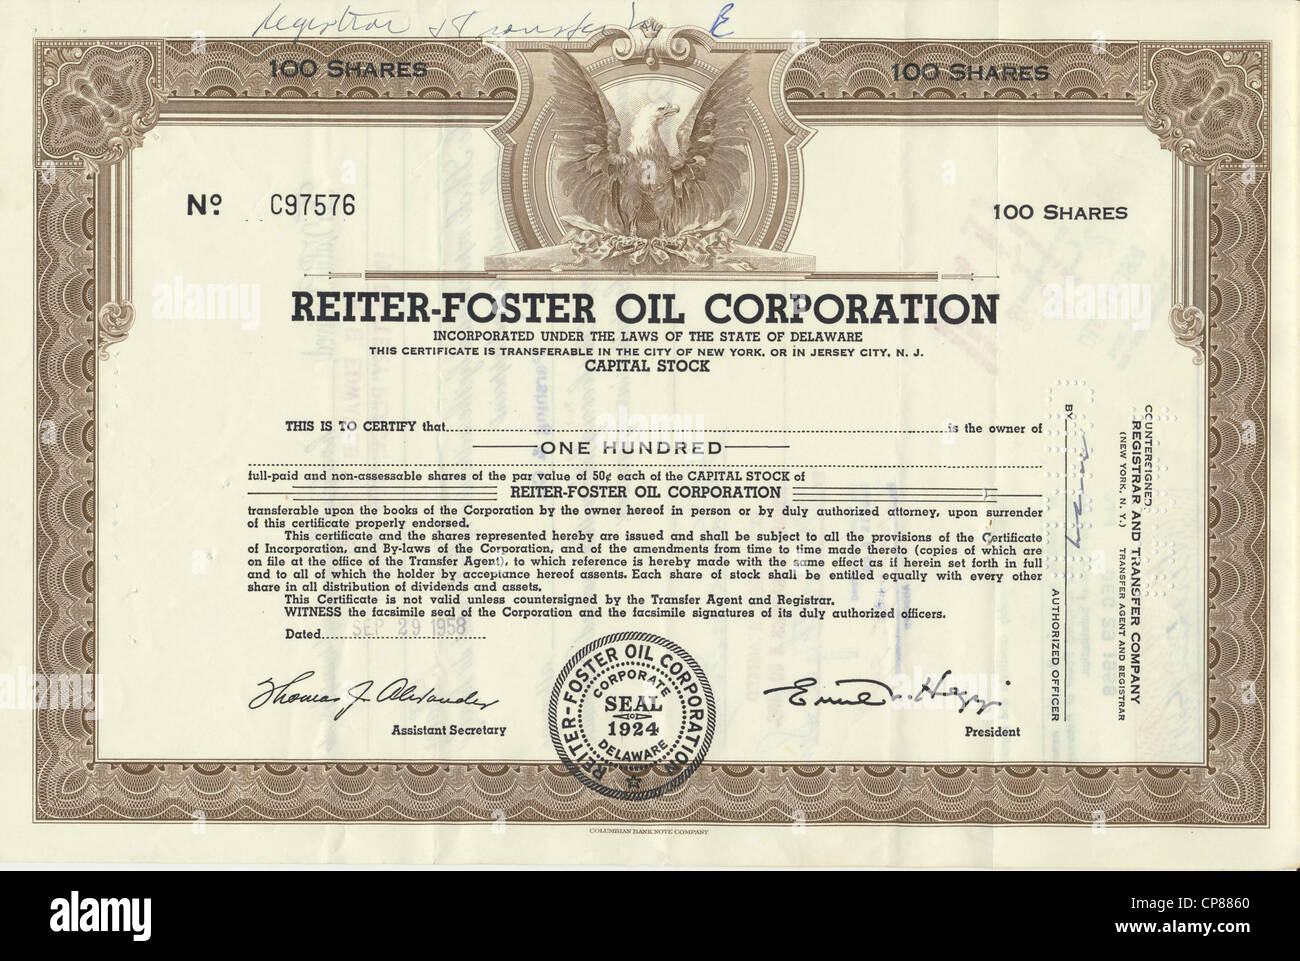 Historical stock certificate of an oil and gas company, Reiter-Foster Oil Corporation, Delaware, USA, 1958, Wertpapier, historis Stock Photo